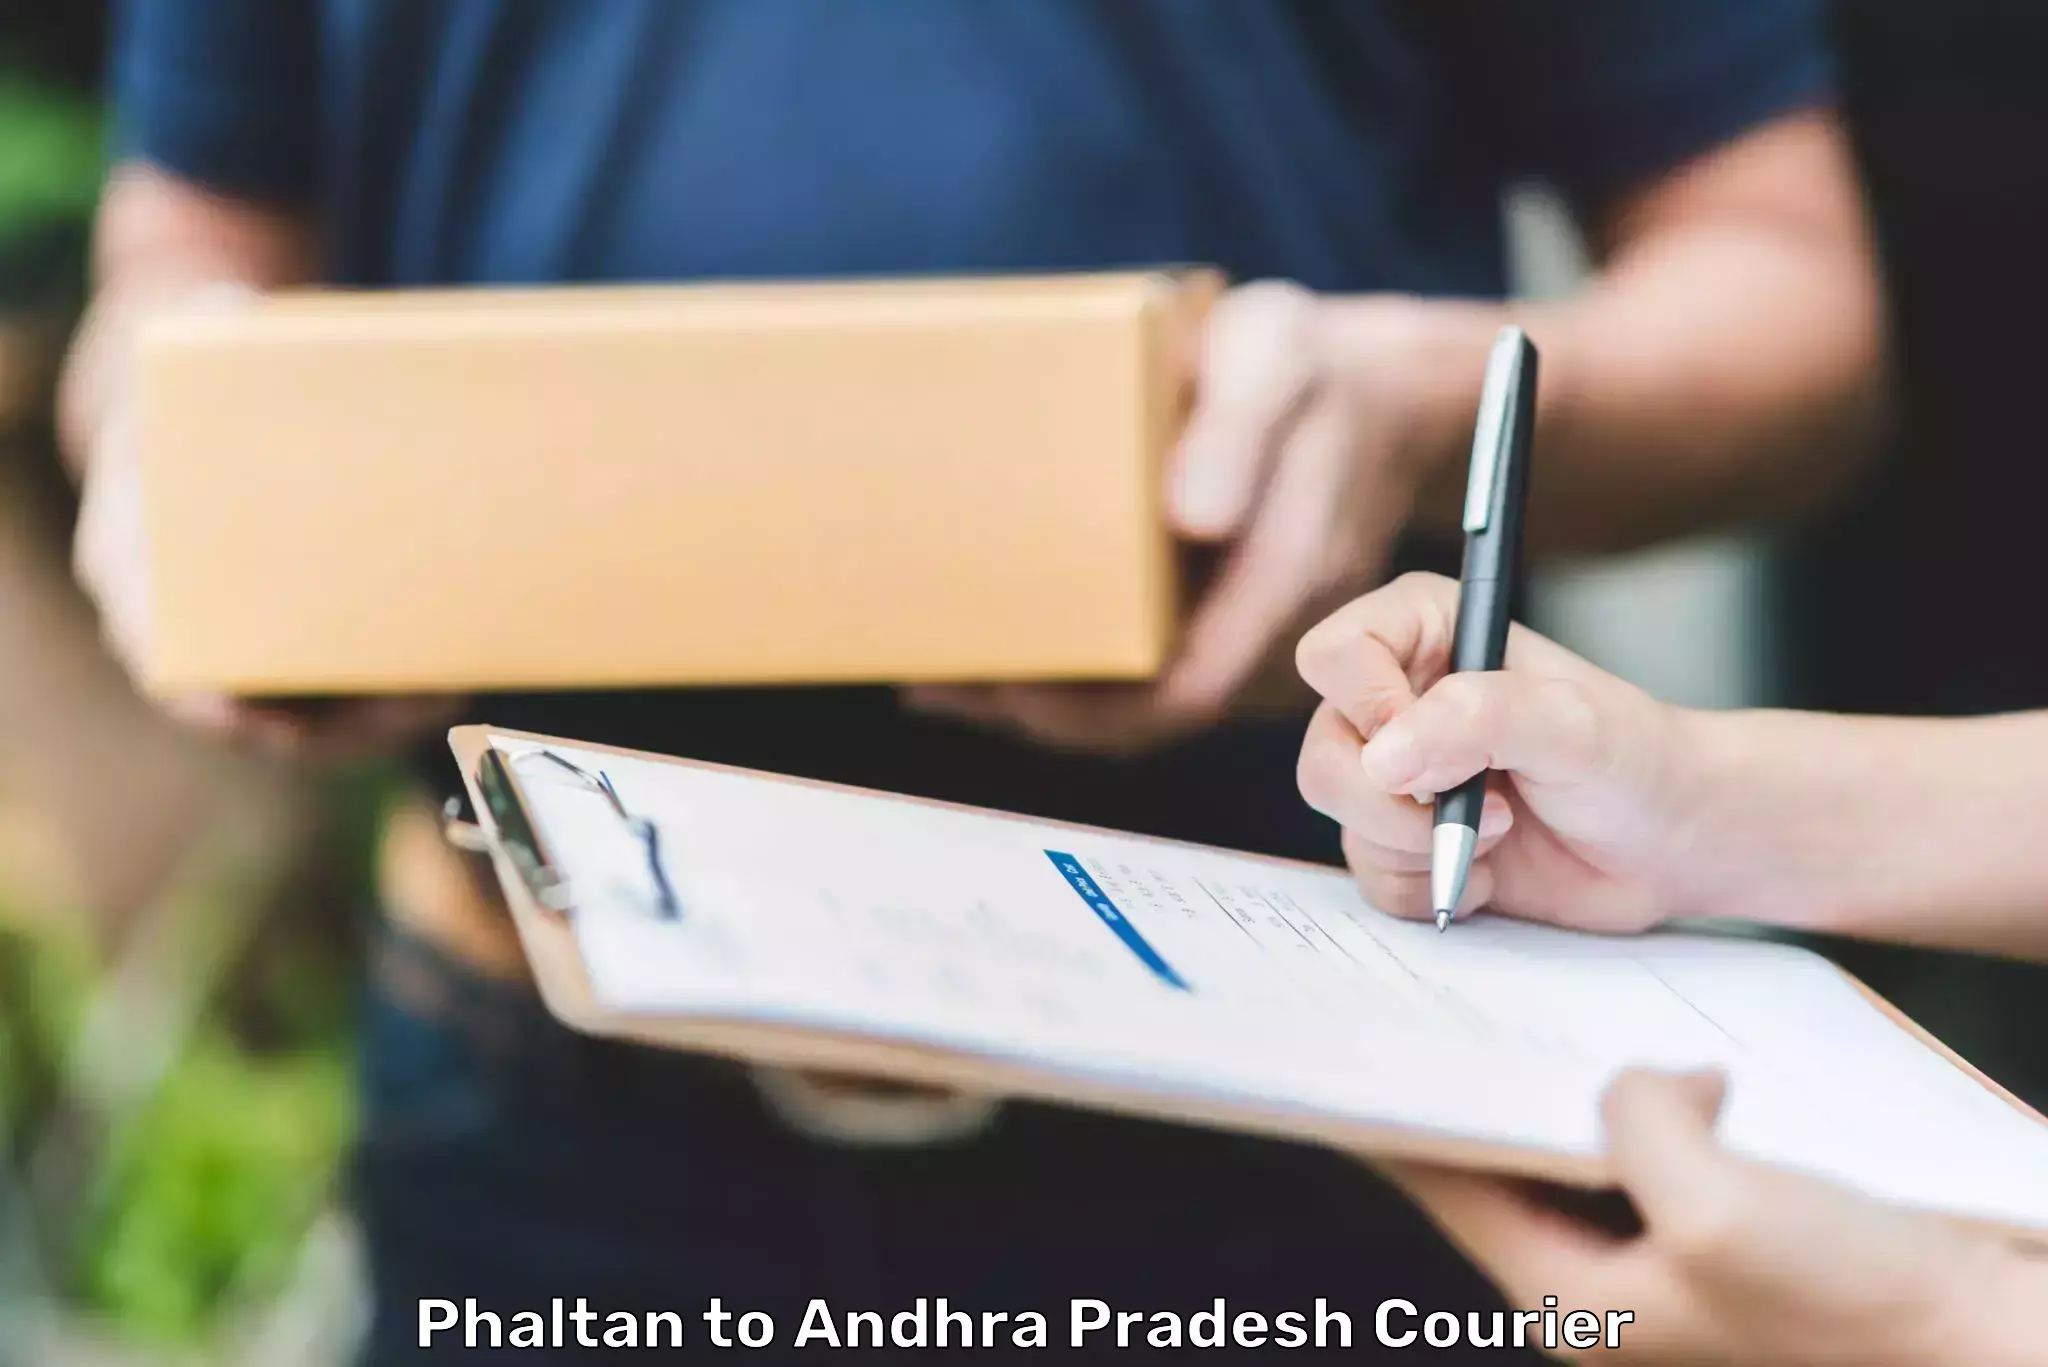 Courier service partnerships Phaltan to Nellore